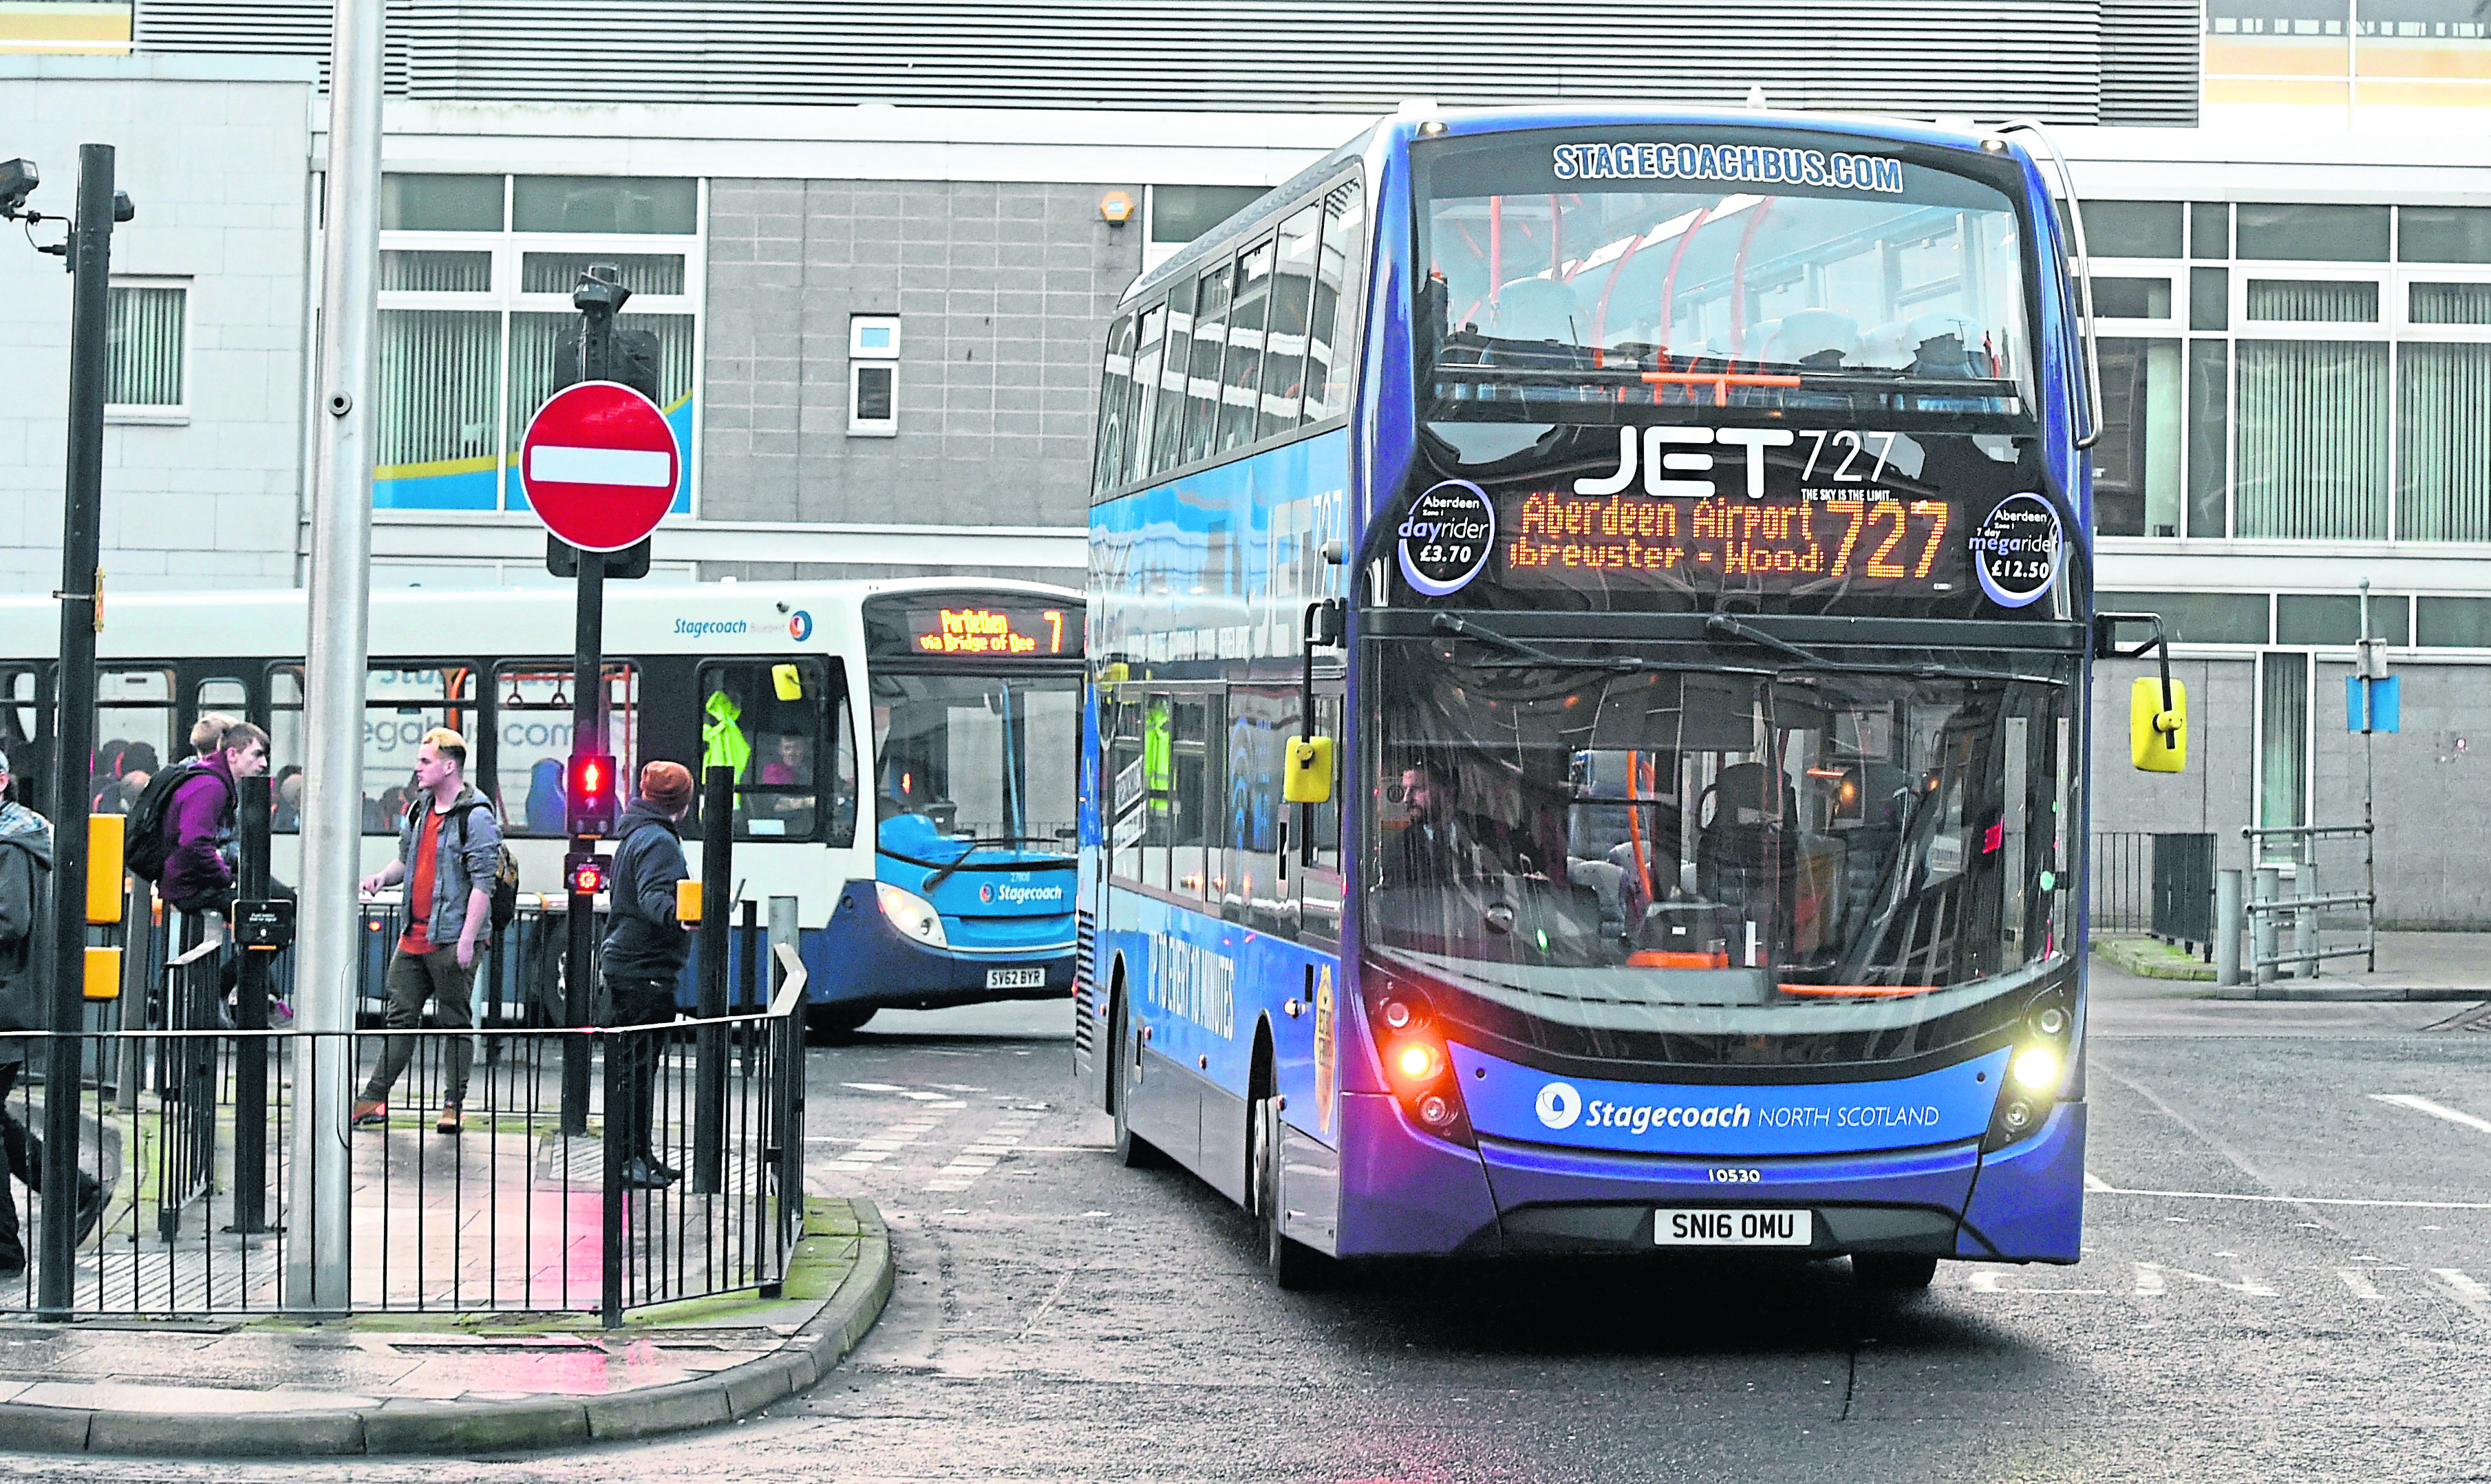 The 727 bus leaves Aberdeen bus station to get to the airport at Dyce, Aberdeen.